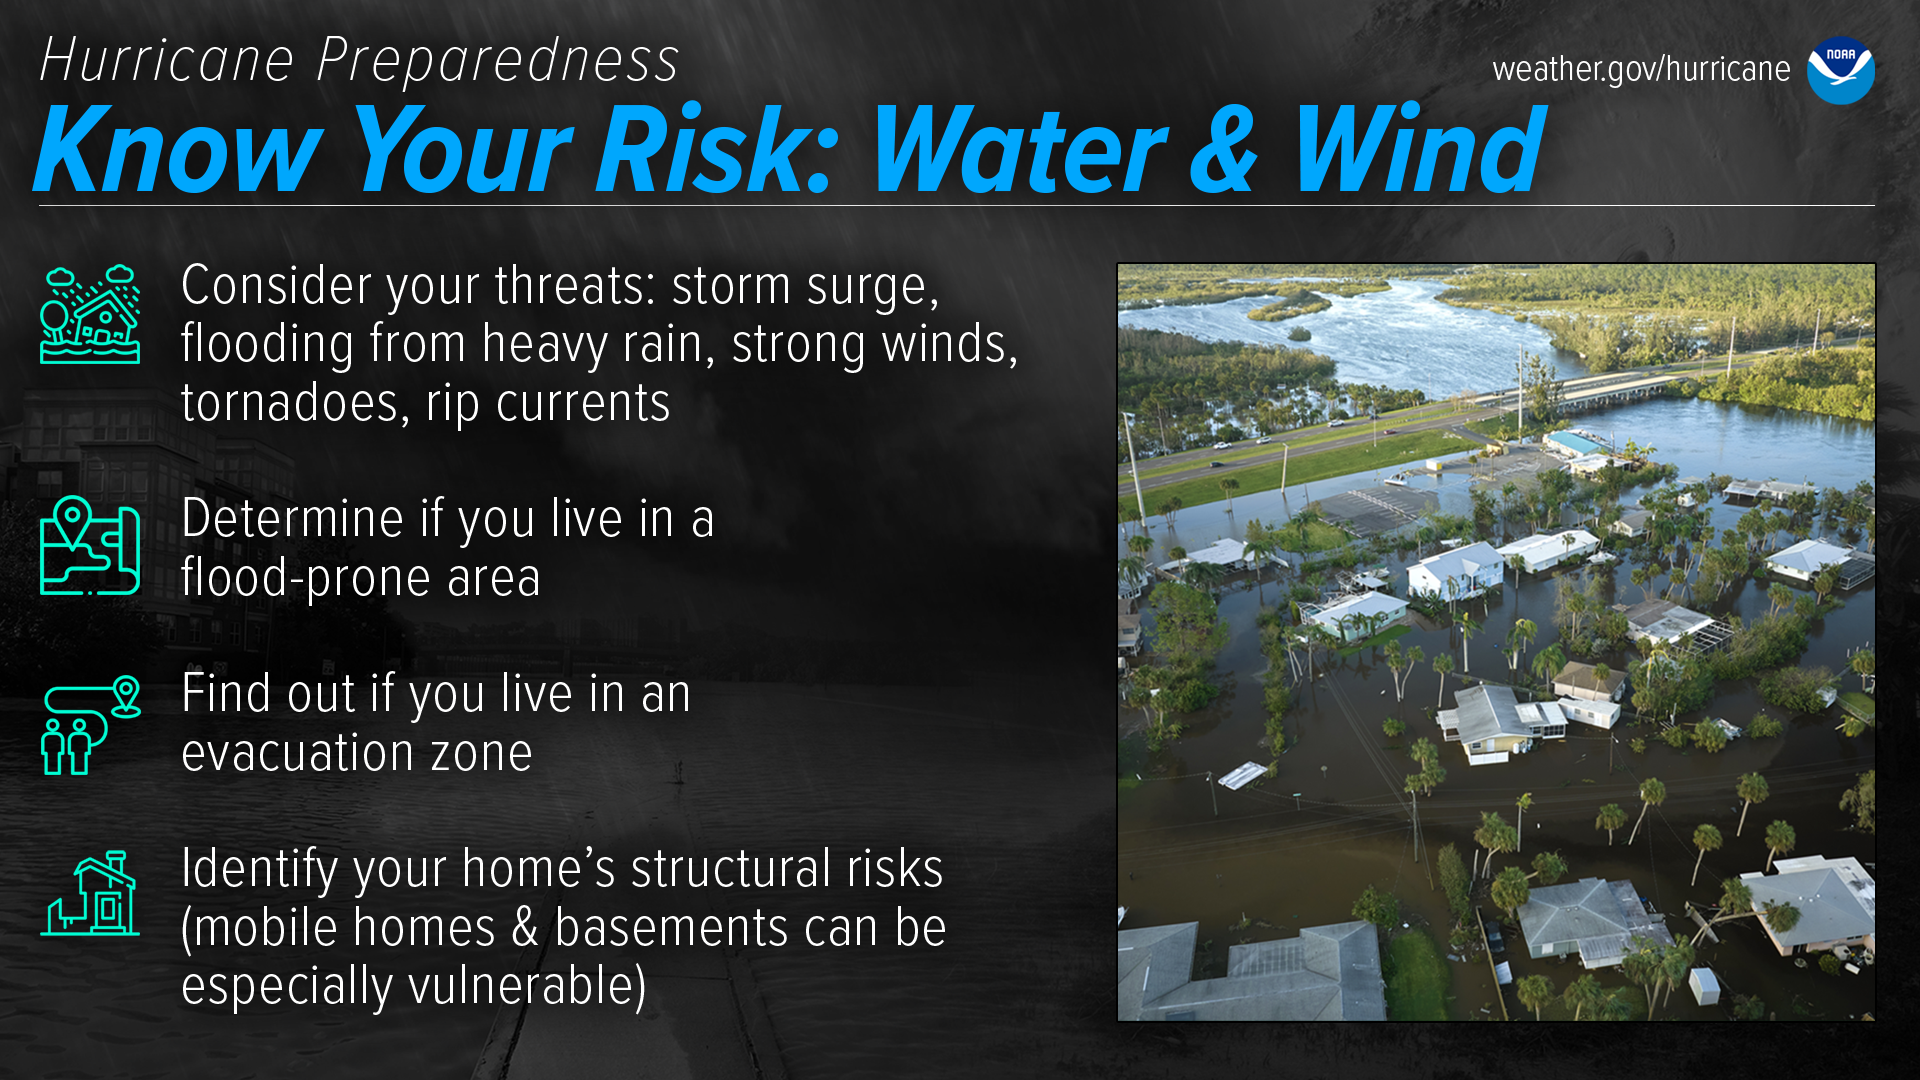 Hurricane Preparedness: Know your risk: water & wind. Consider your threats: storm surge, flooding from heavy rain, strong winds, tornadoes, rip currents. Determine if you live in a flood-prone area. Find out if you live in an evacuation zone. Identify your home's structural risk (mobile homes & basements can be especially vulnerable)